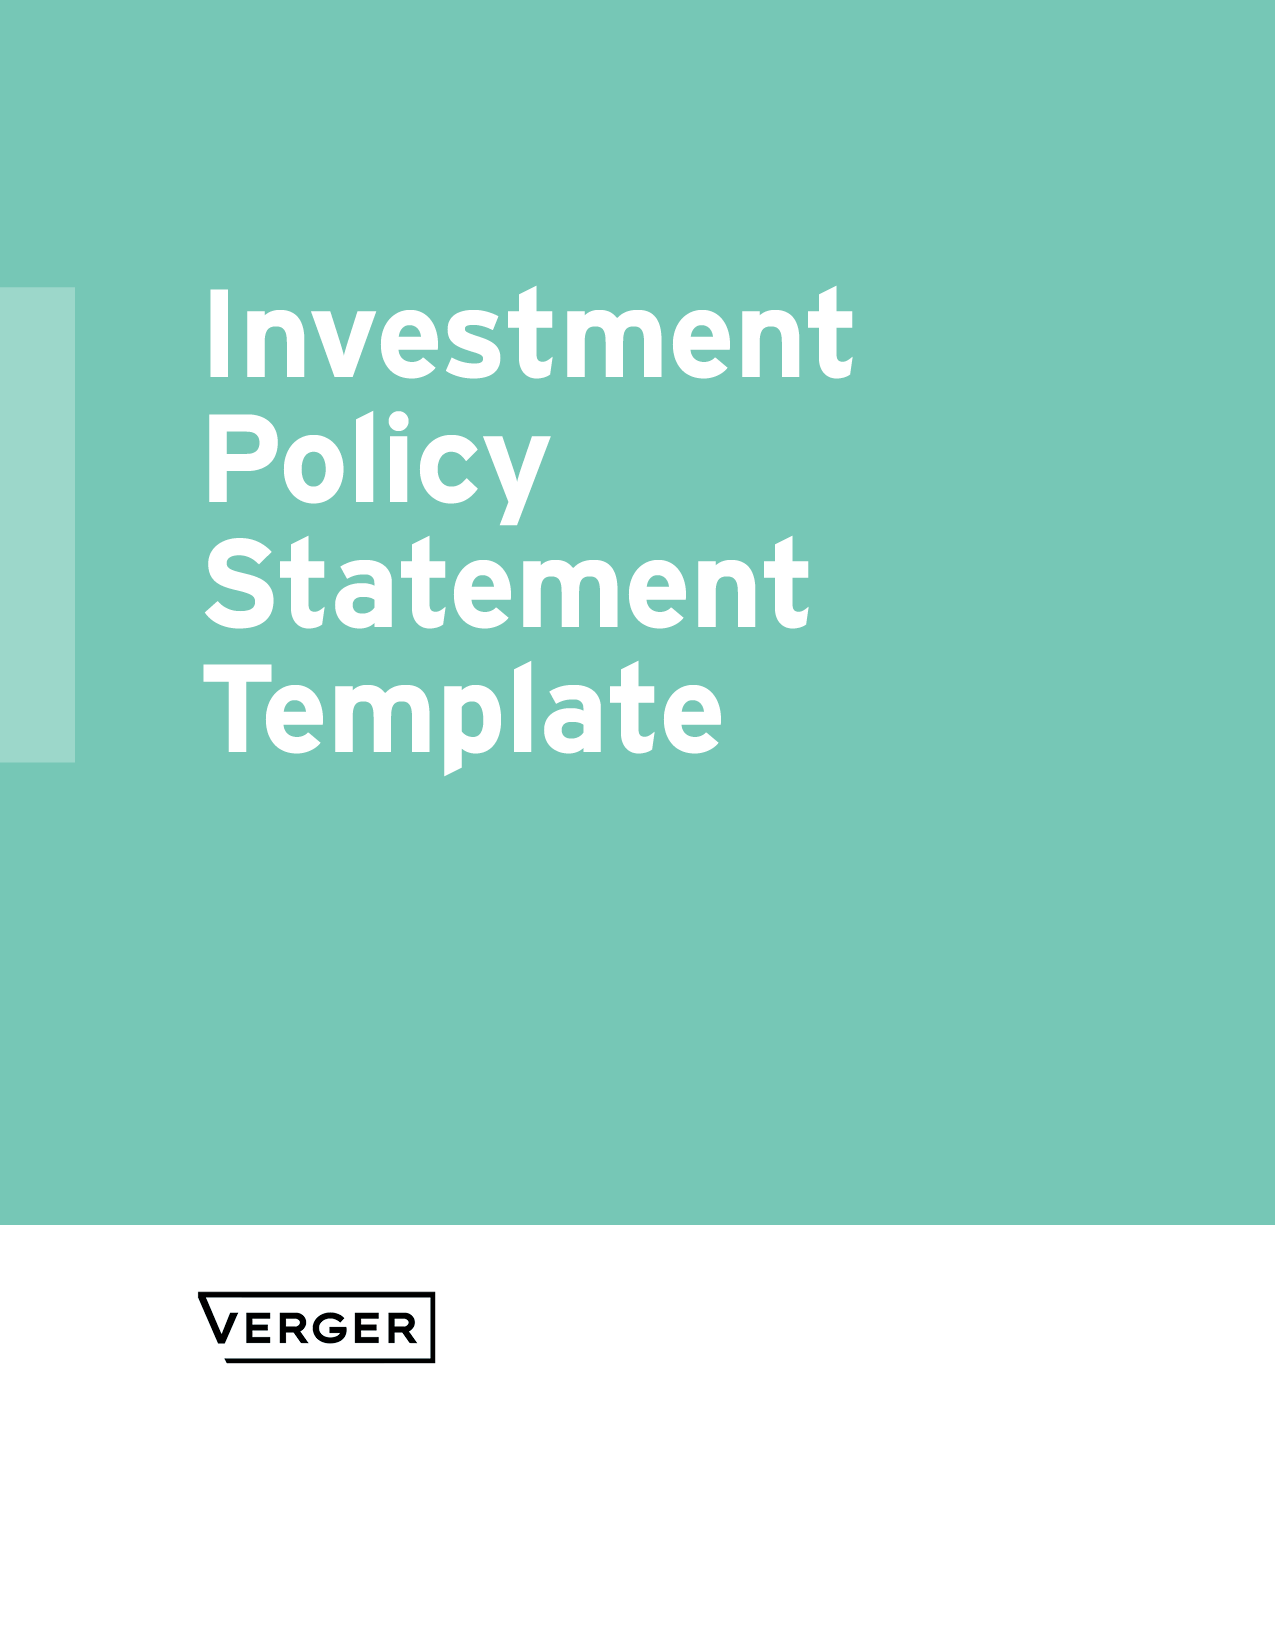 verger-investment-policy-statement